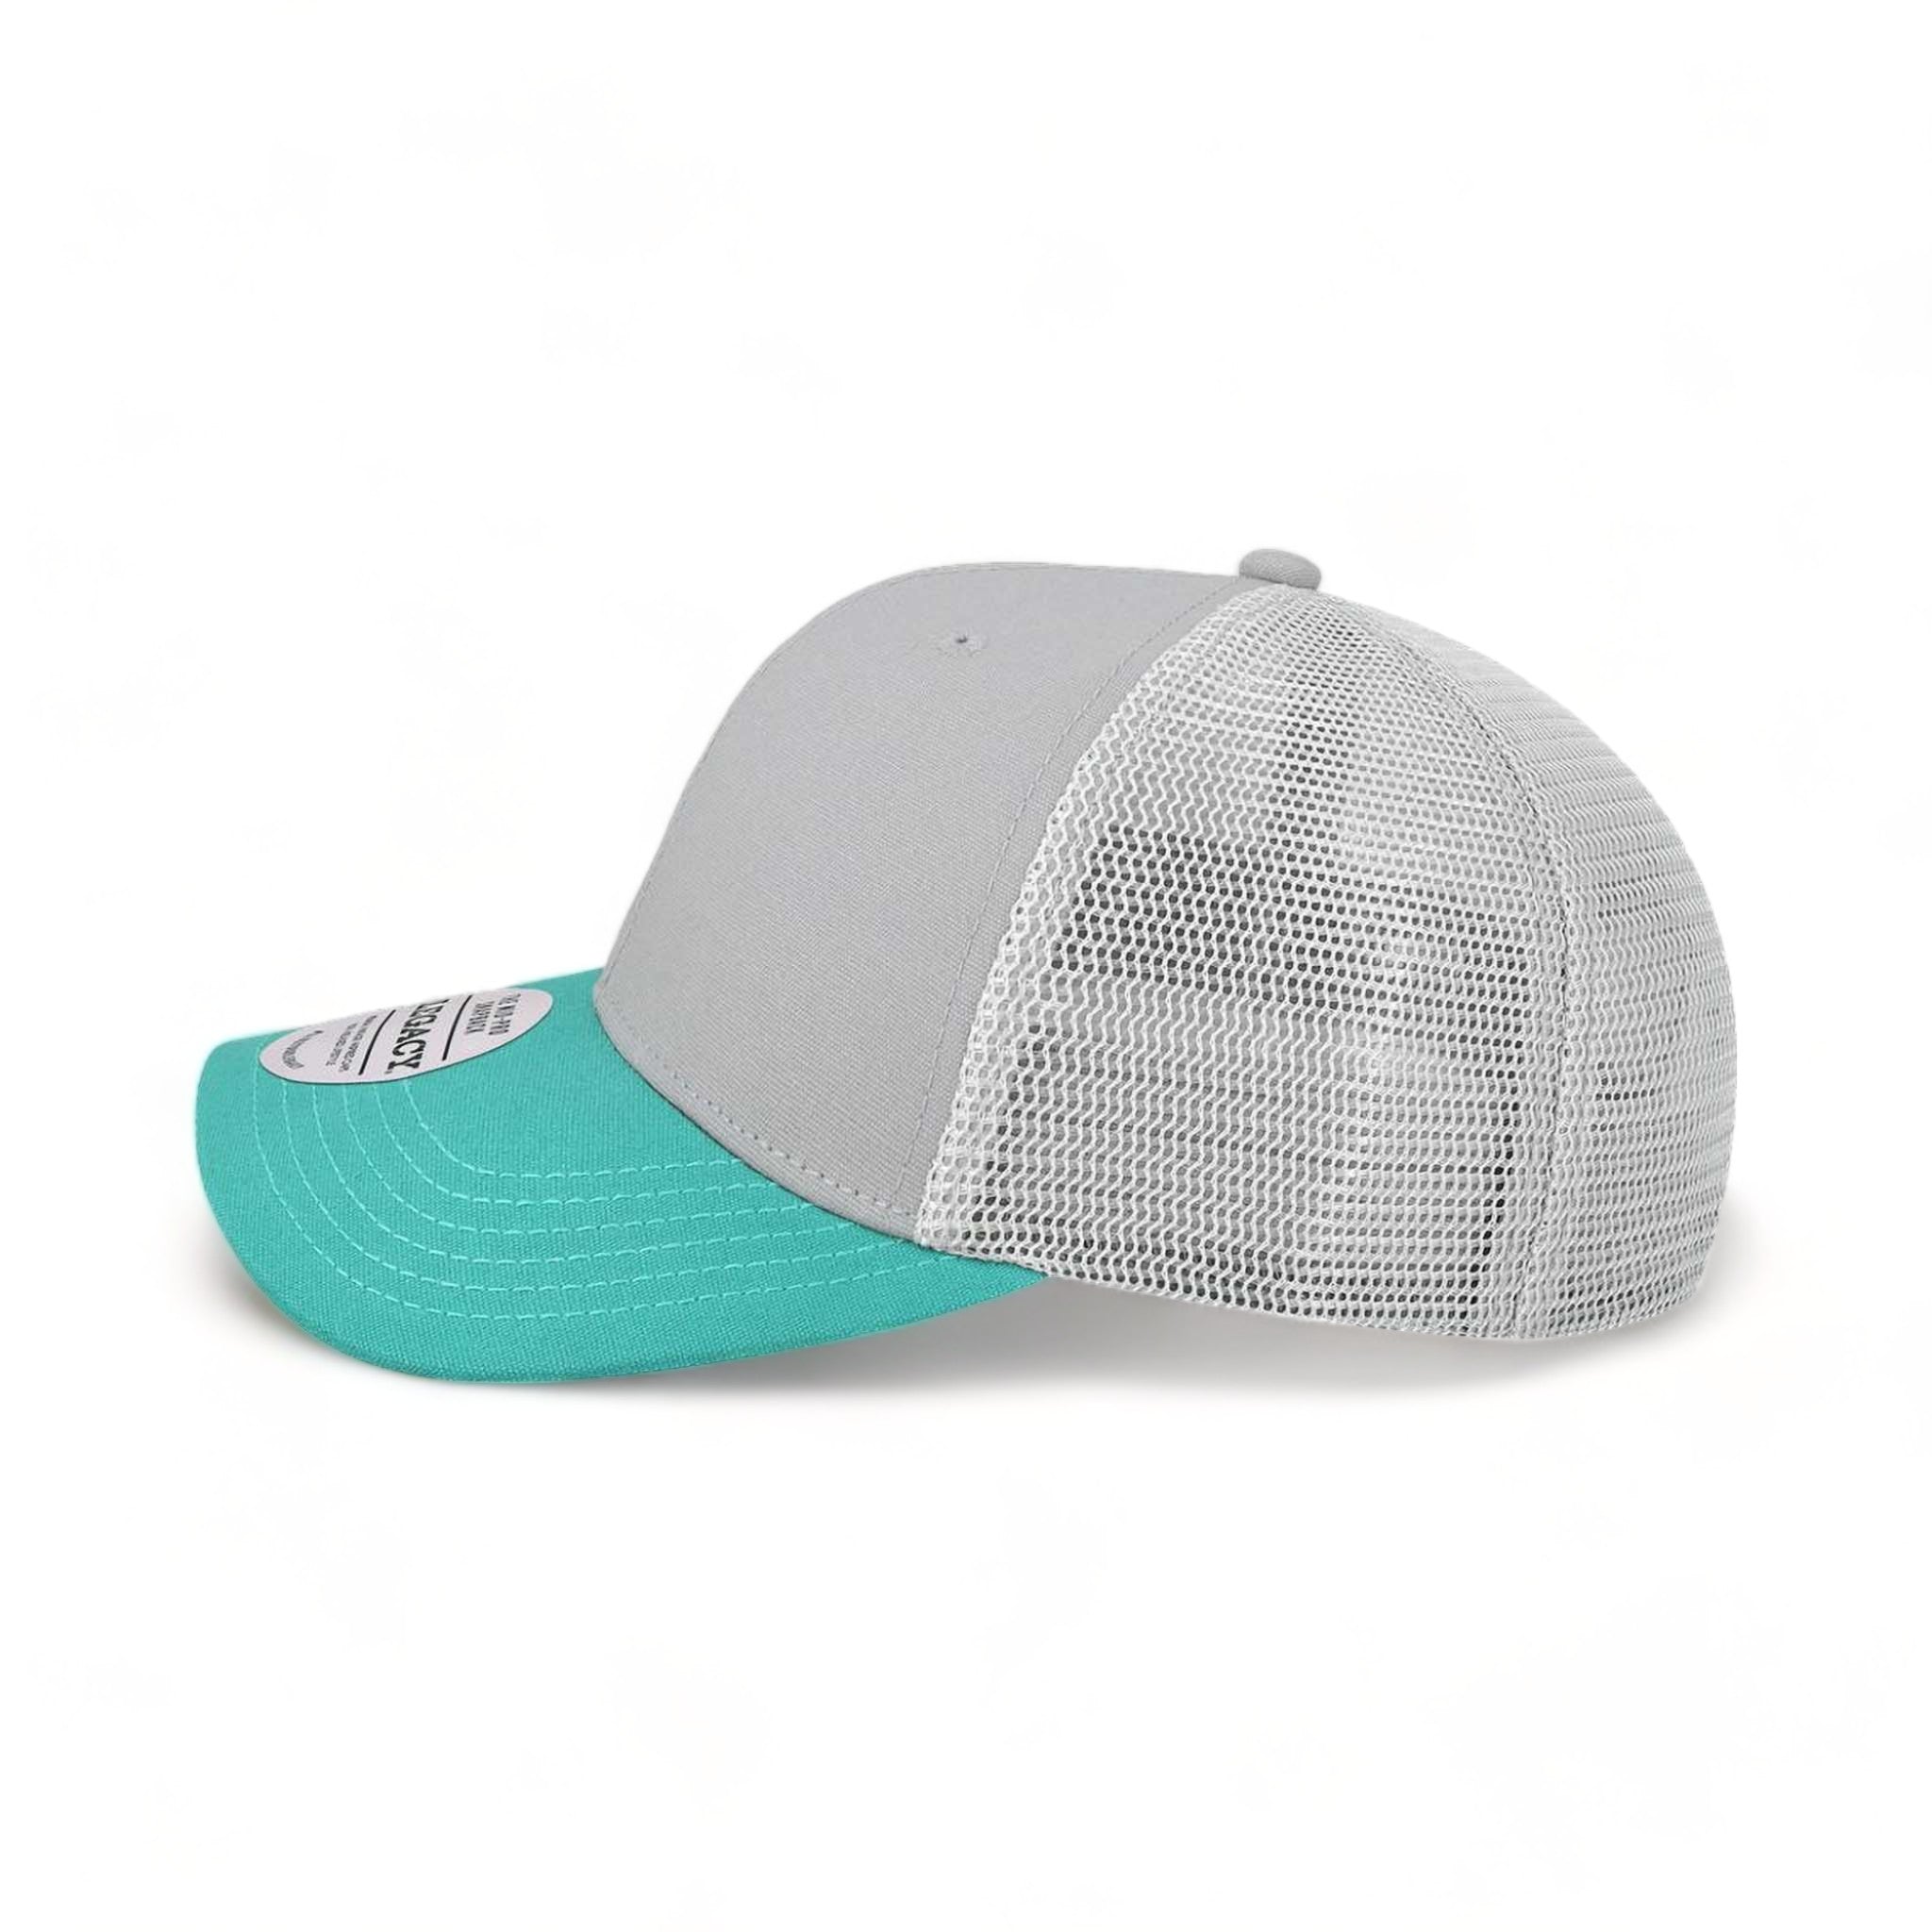 Side view of LEGACY MPS custom hat in light grey, seafoam and silver